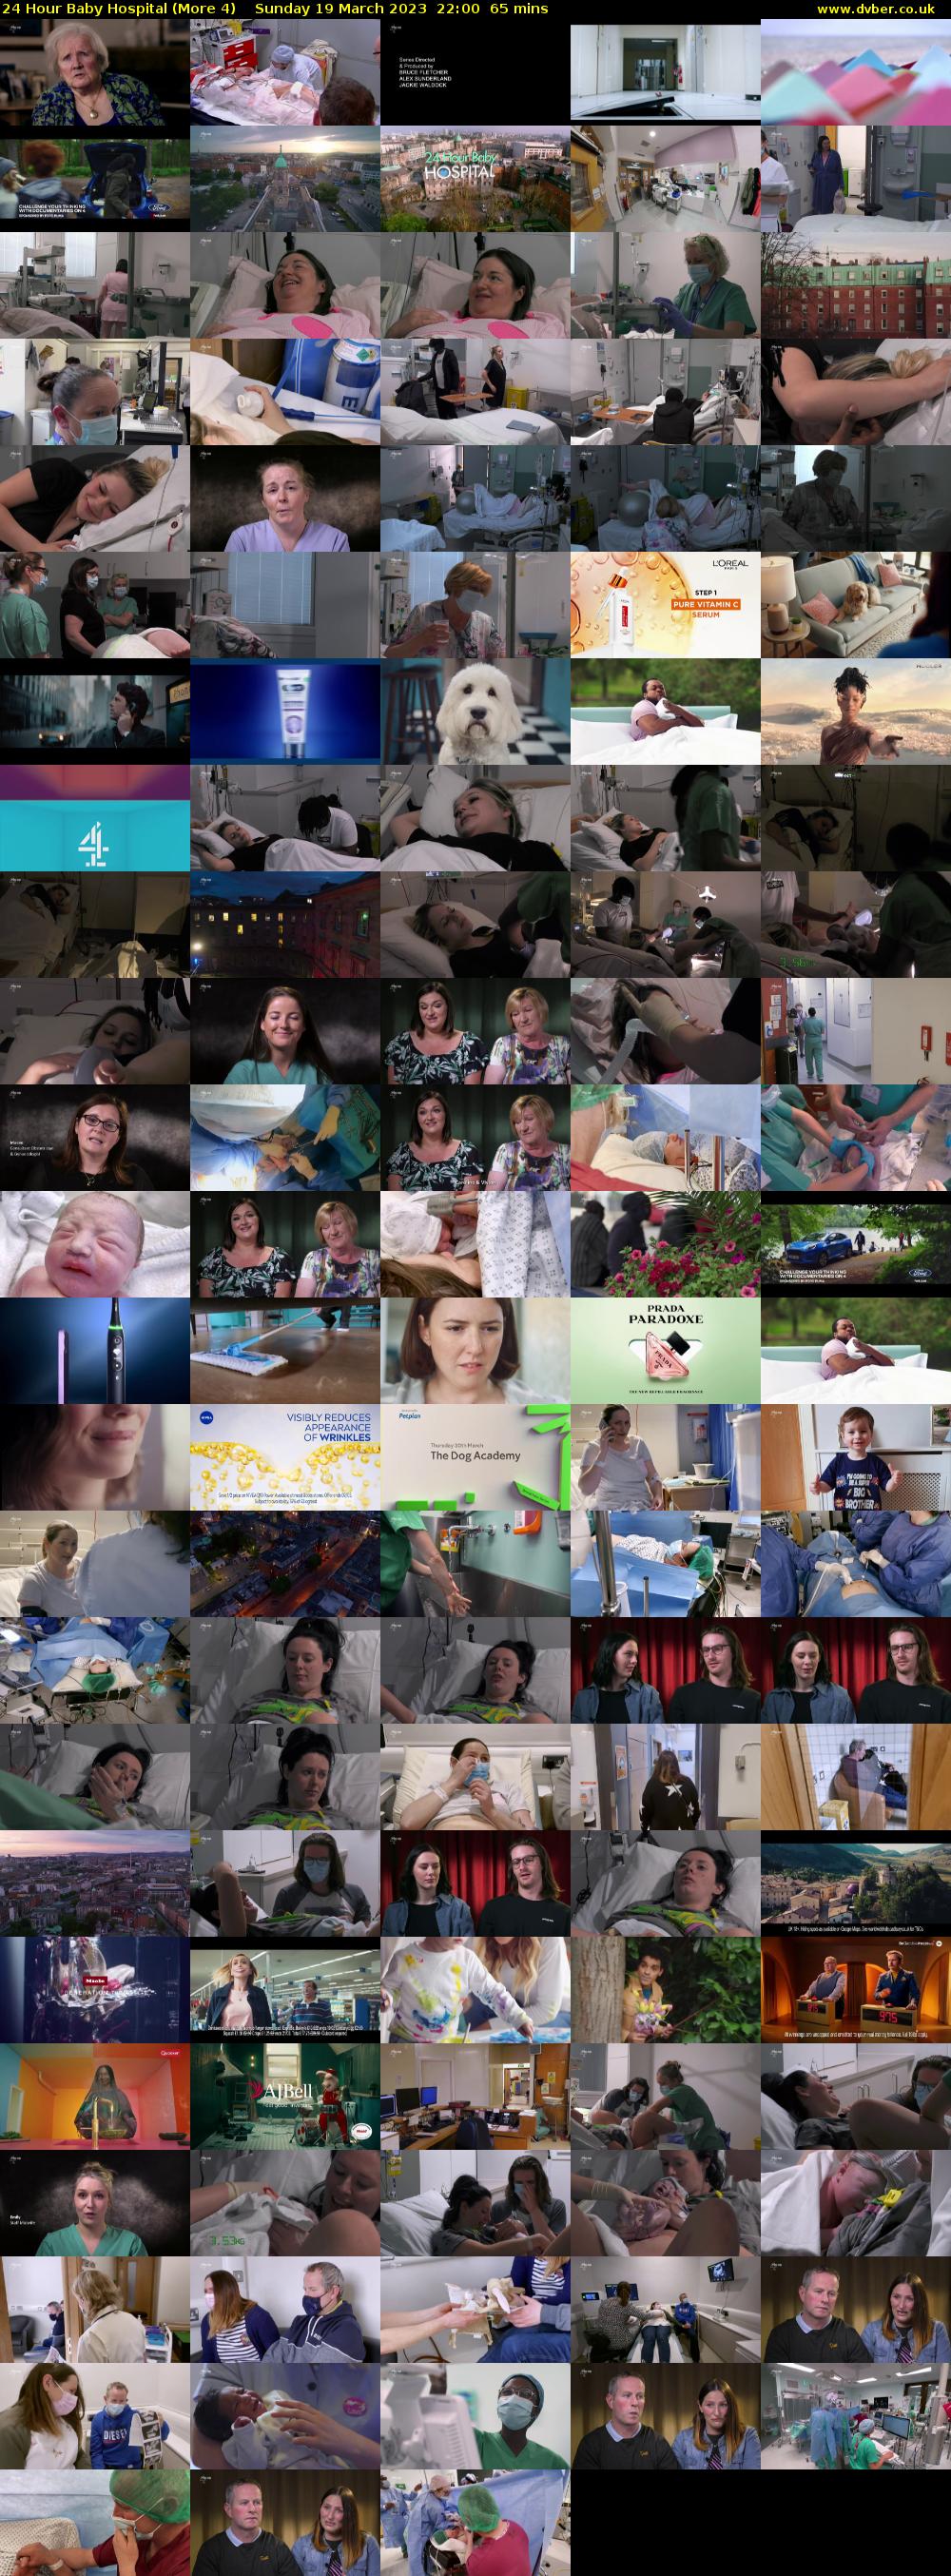 24 Hour Baby Hospital (More 4) Sunday 19 March 2023 22:00 - 23:05